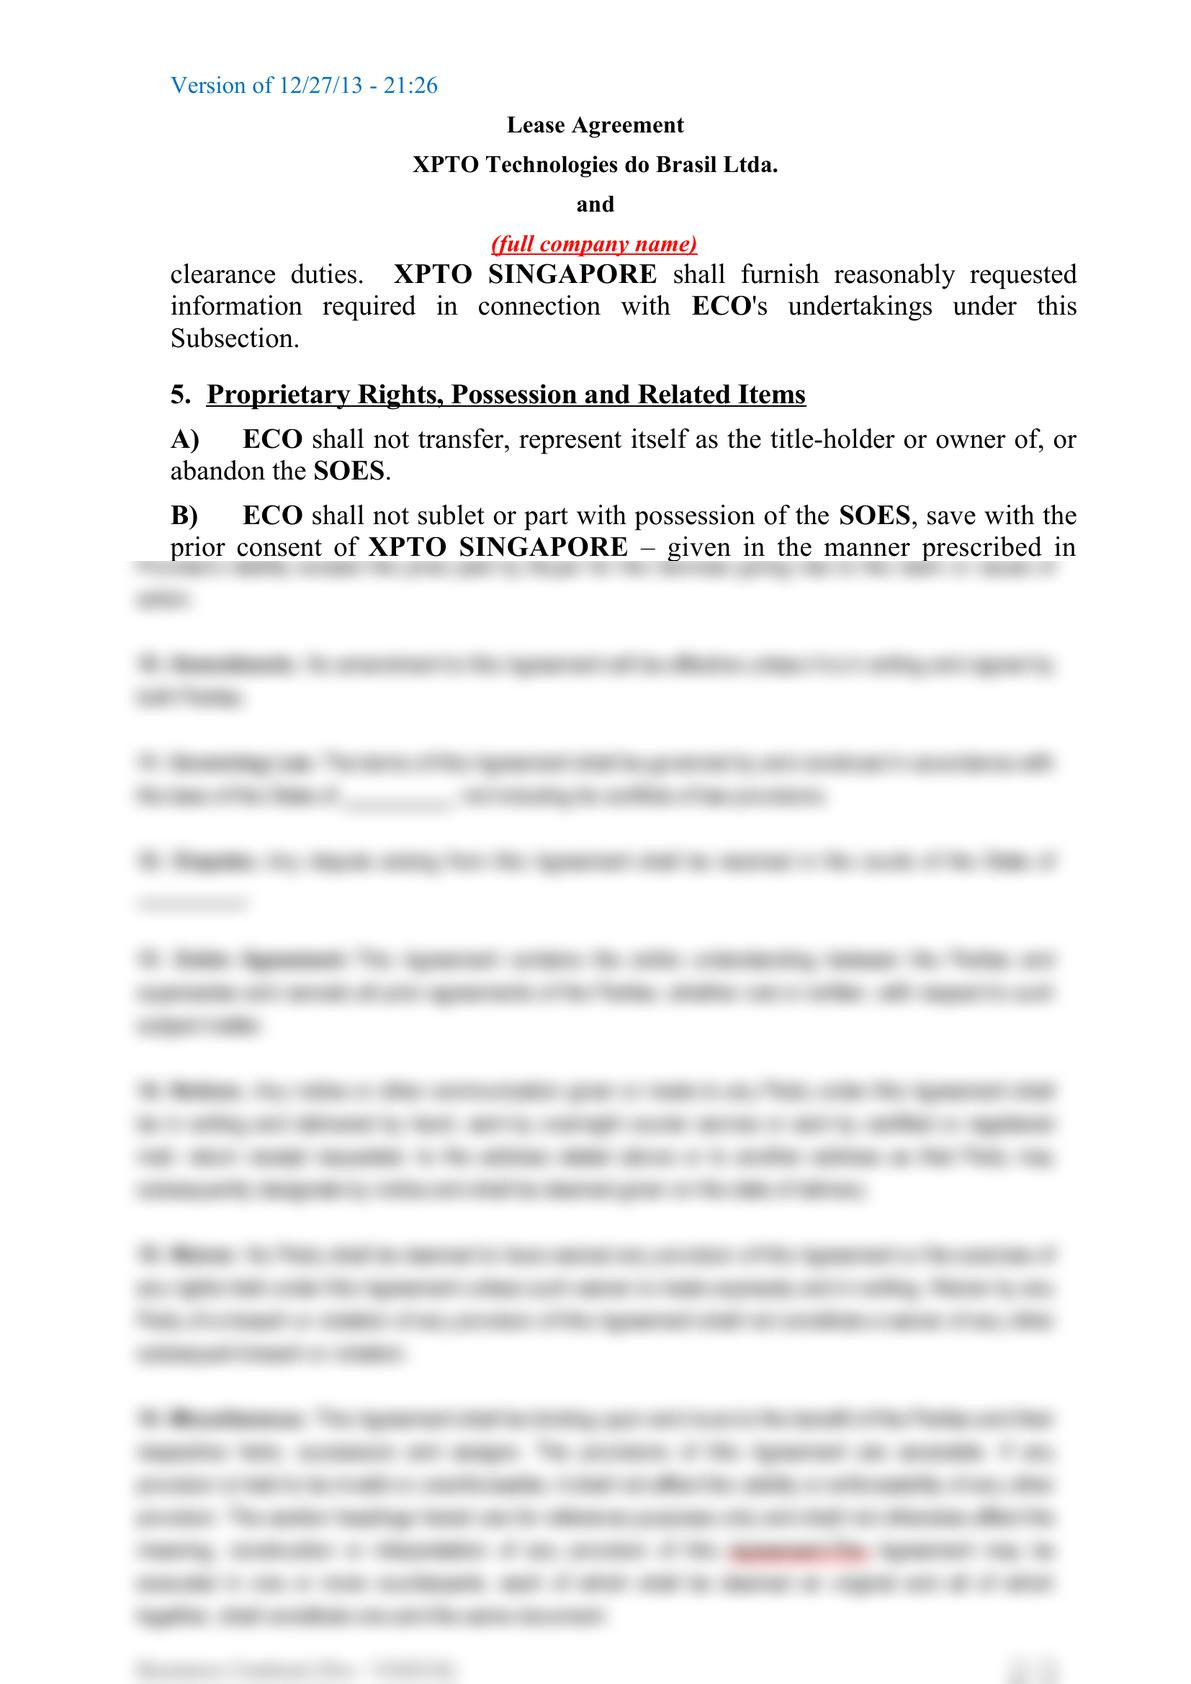 Subsea equipment lease agreement-3